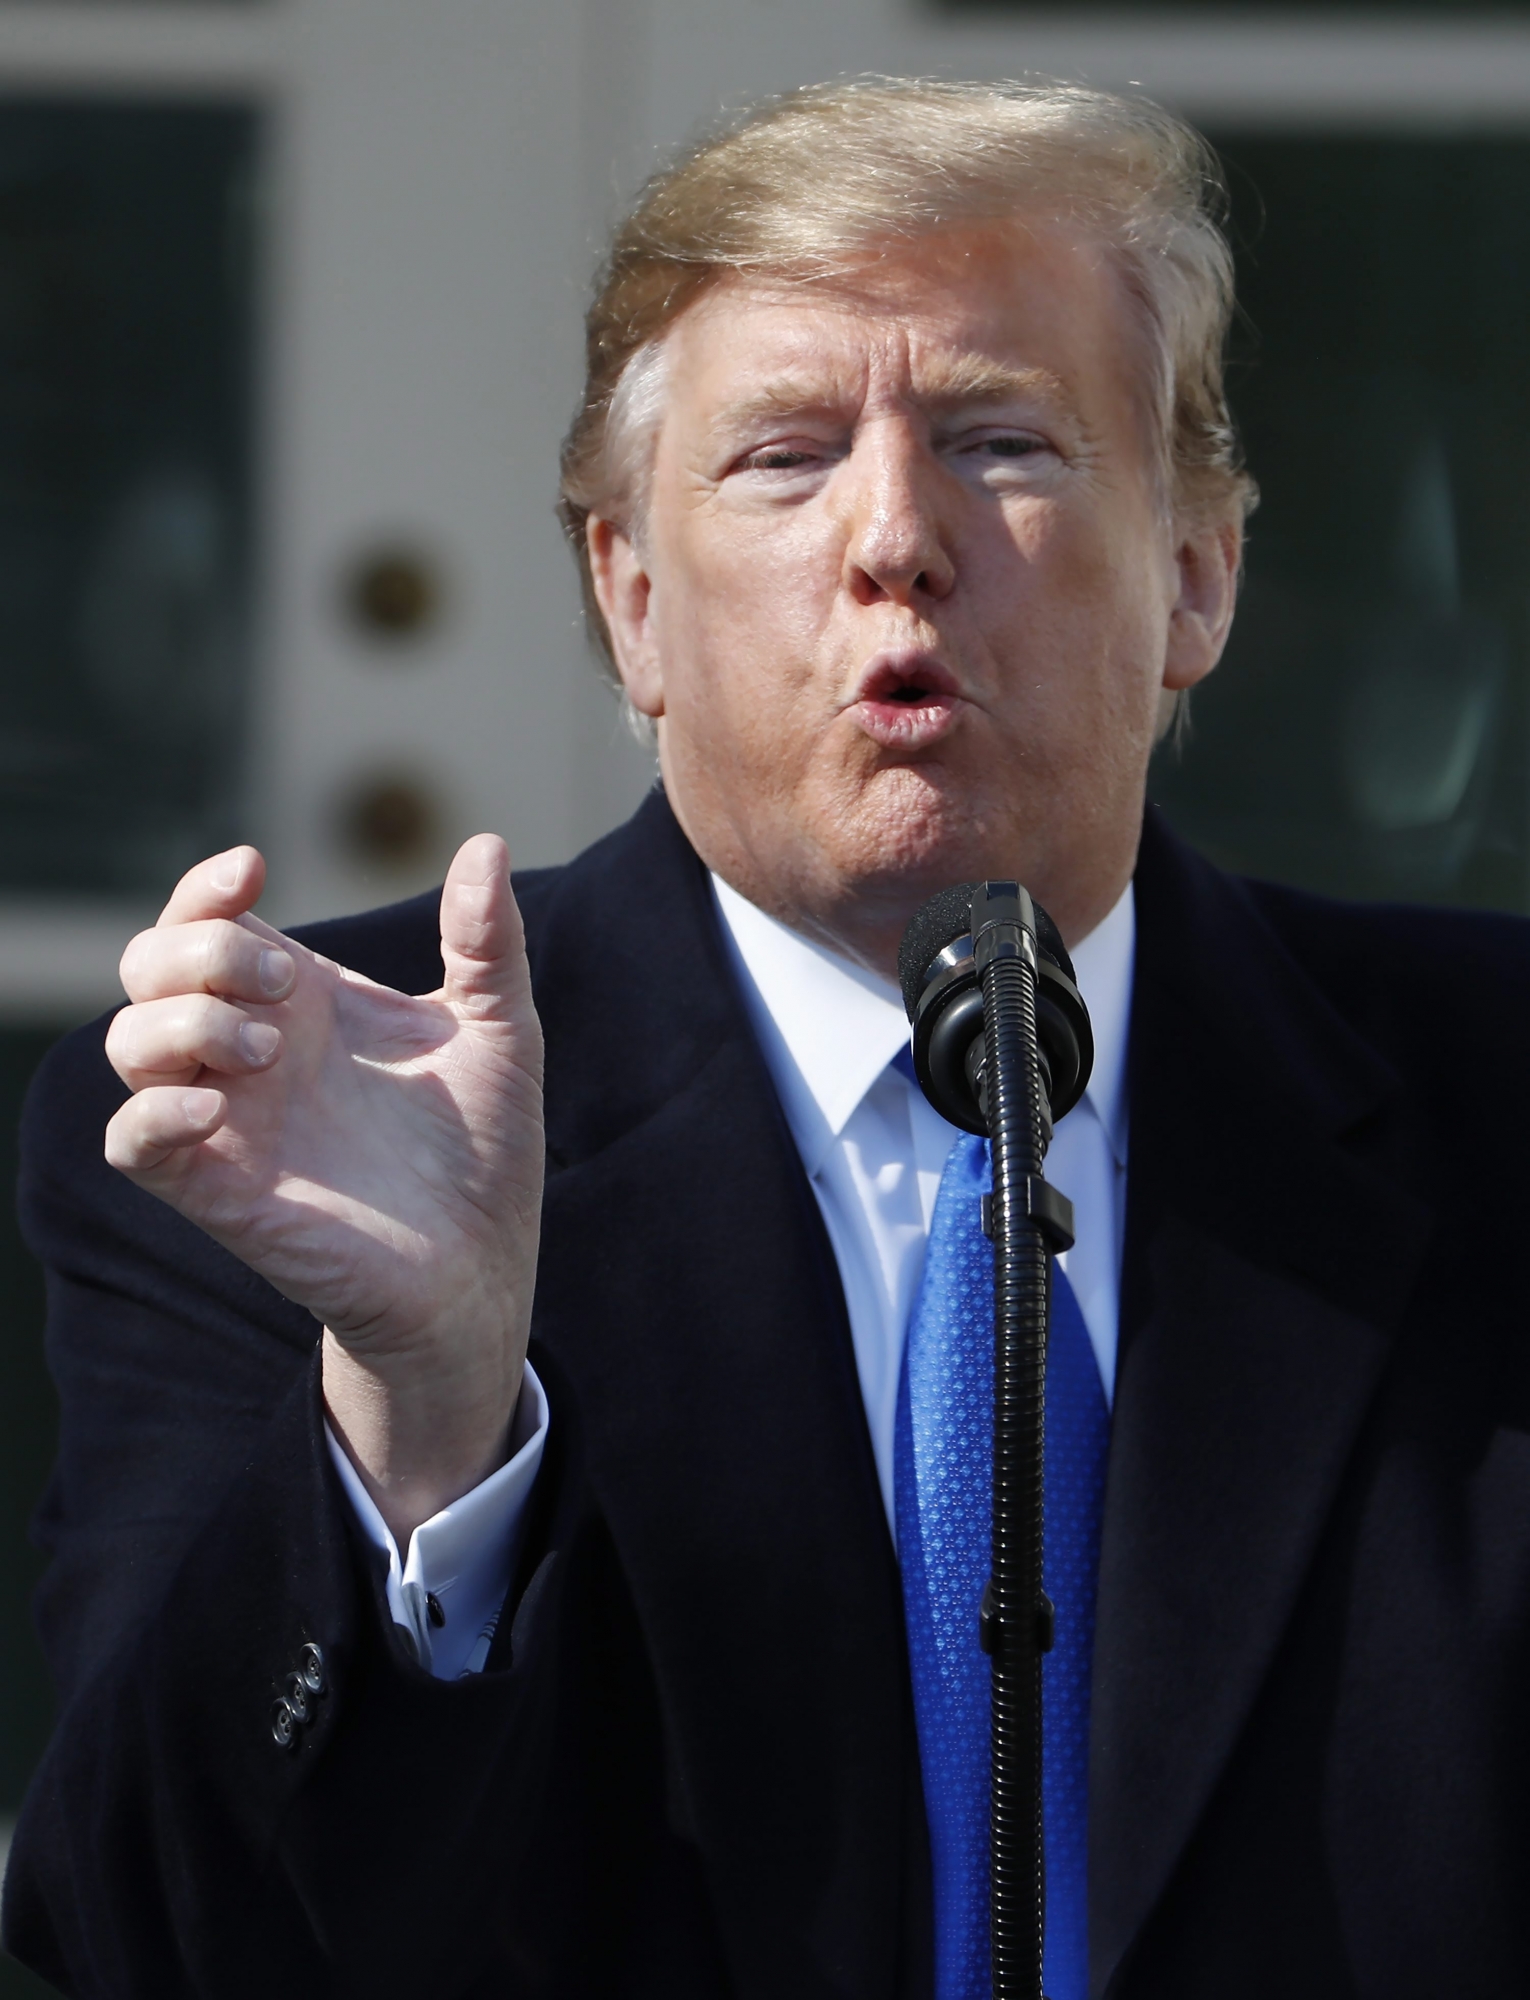 epa07372876 US President Donald J. Trump gestures as he speaks about a 328 billion USD (290.7 billion euro) spending bill to prevent another government shutdown in Washington, DC, USA, 15 February 2019. President Trump also declared a national emergency to attempt to build his long-promised border wall. Democratic lawmakers have already announced they will challenge that declaration.  EPA/ERIK S. LESSER USA TRUMP SHUTDOWN EMERGENCY